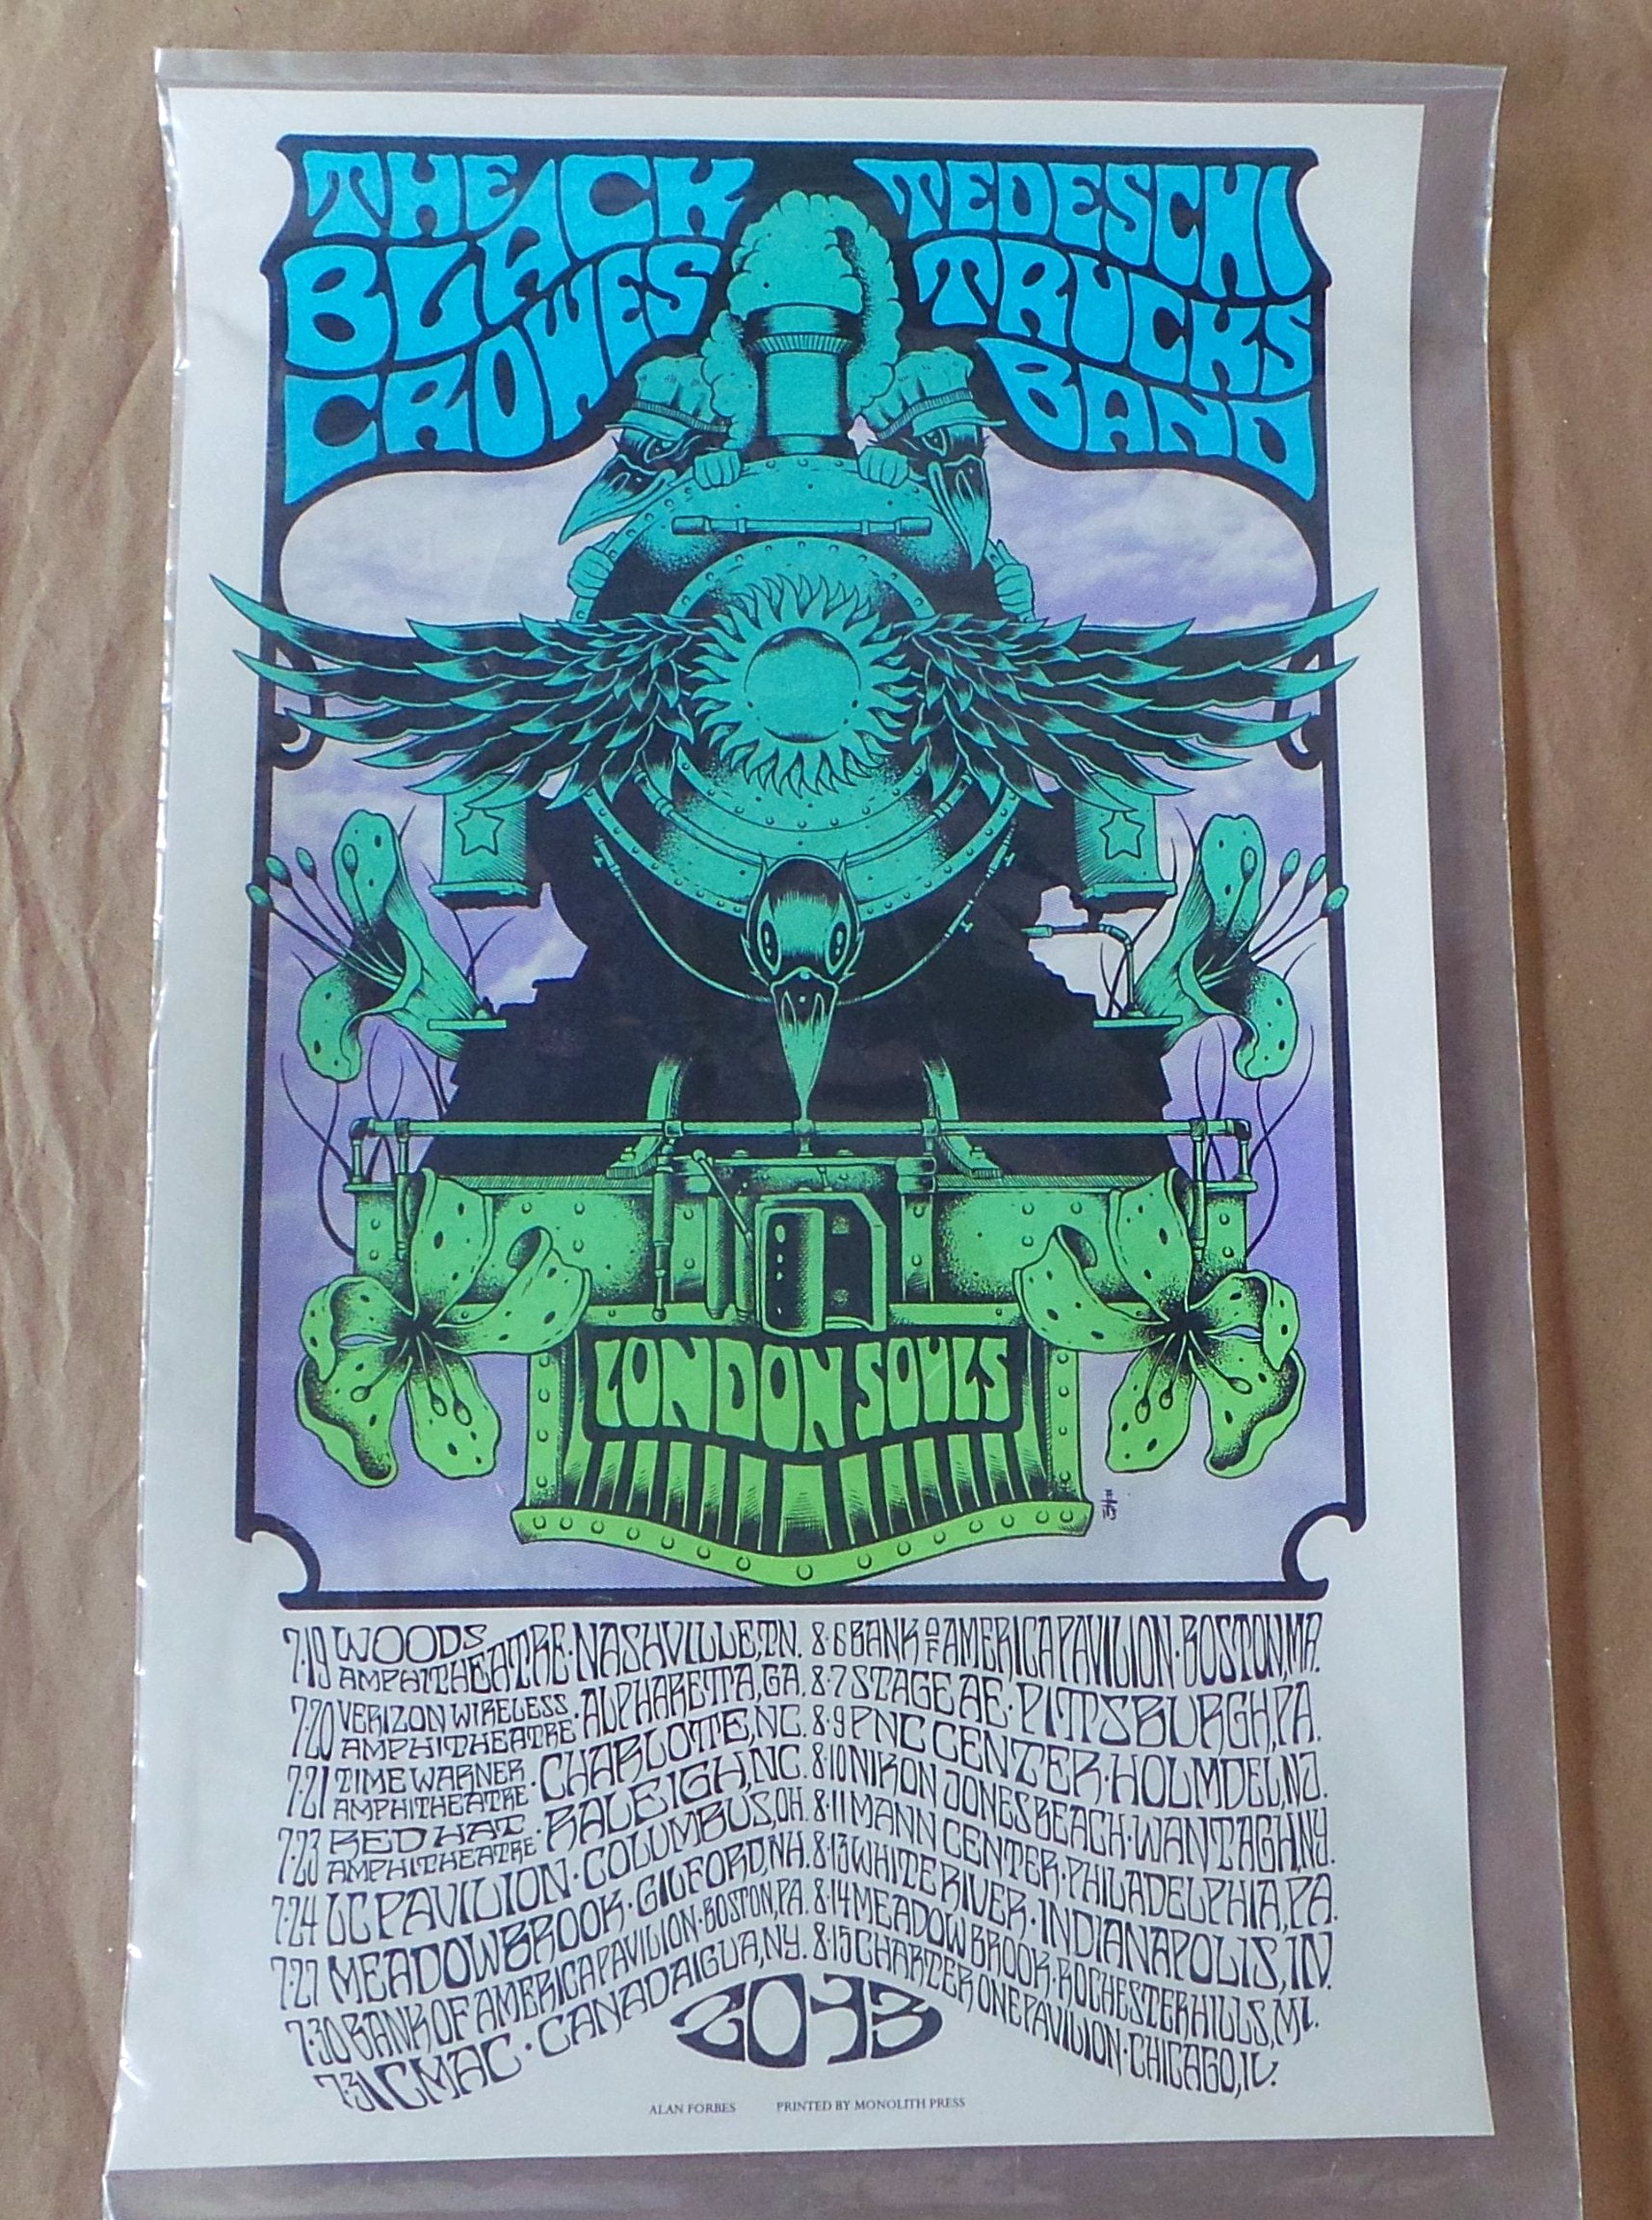 Black Crowes with Tedeschi Trucks Band & London Souls 2013 Tour Poster by Alan Forbes Print measures 15" x 24"  Printed by Monolith Press  Check out our other listings for more hard-to-find and out-of-print posters.